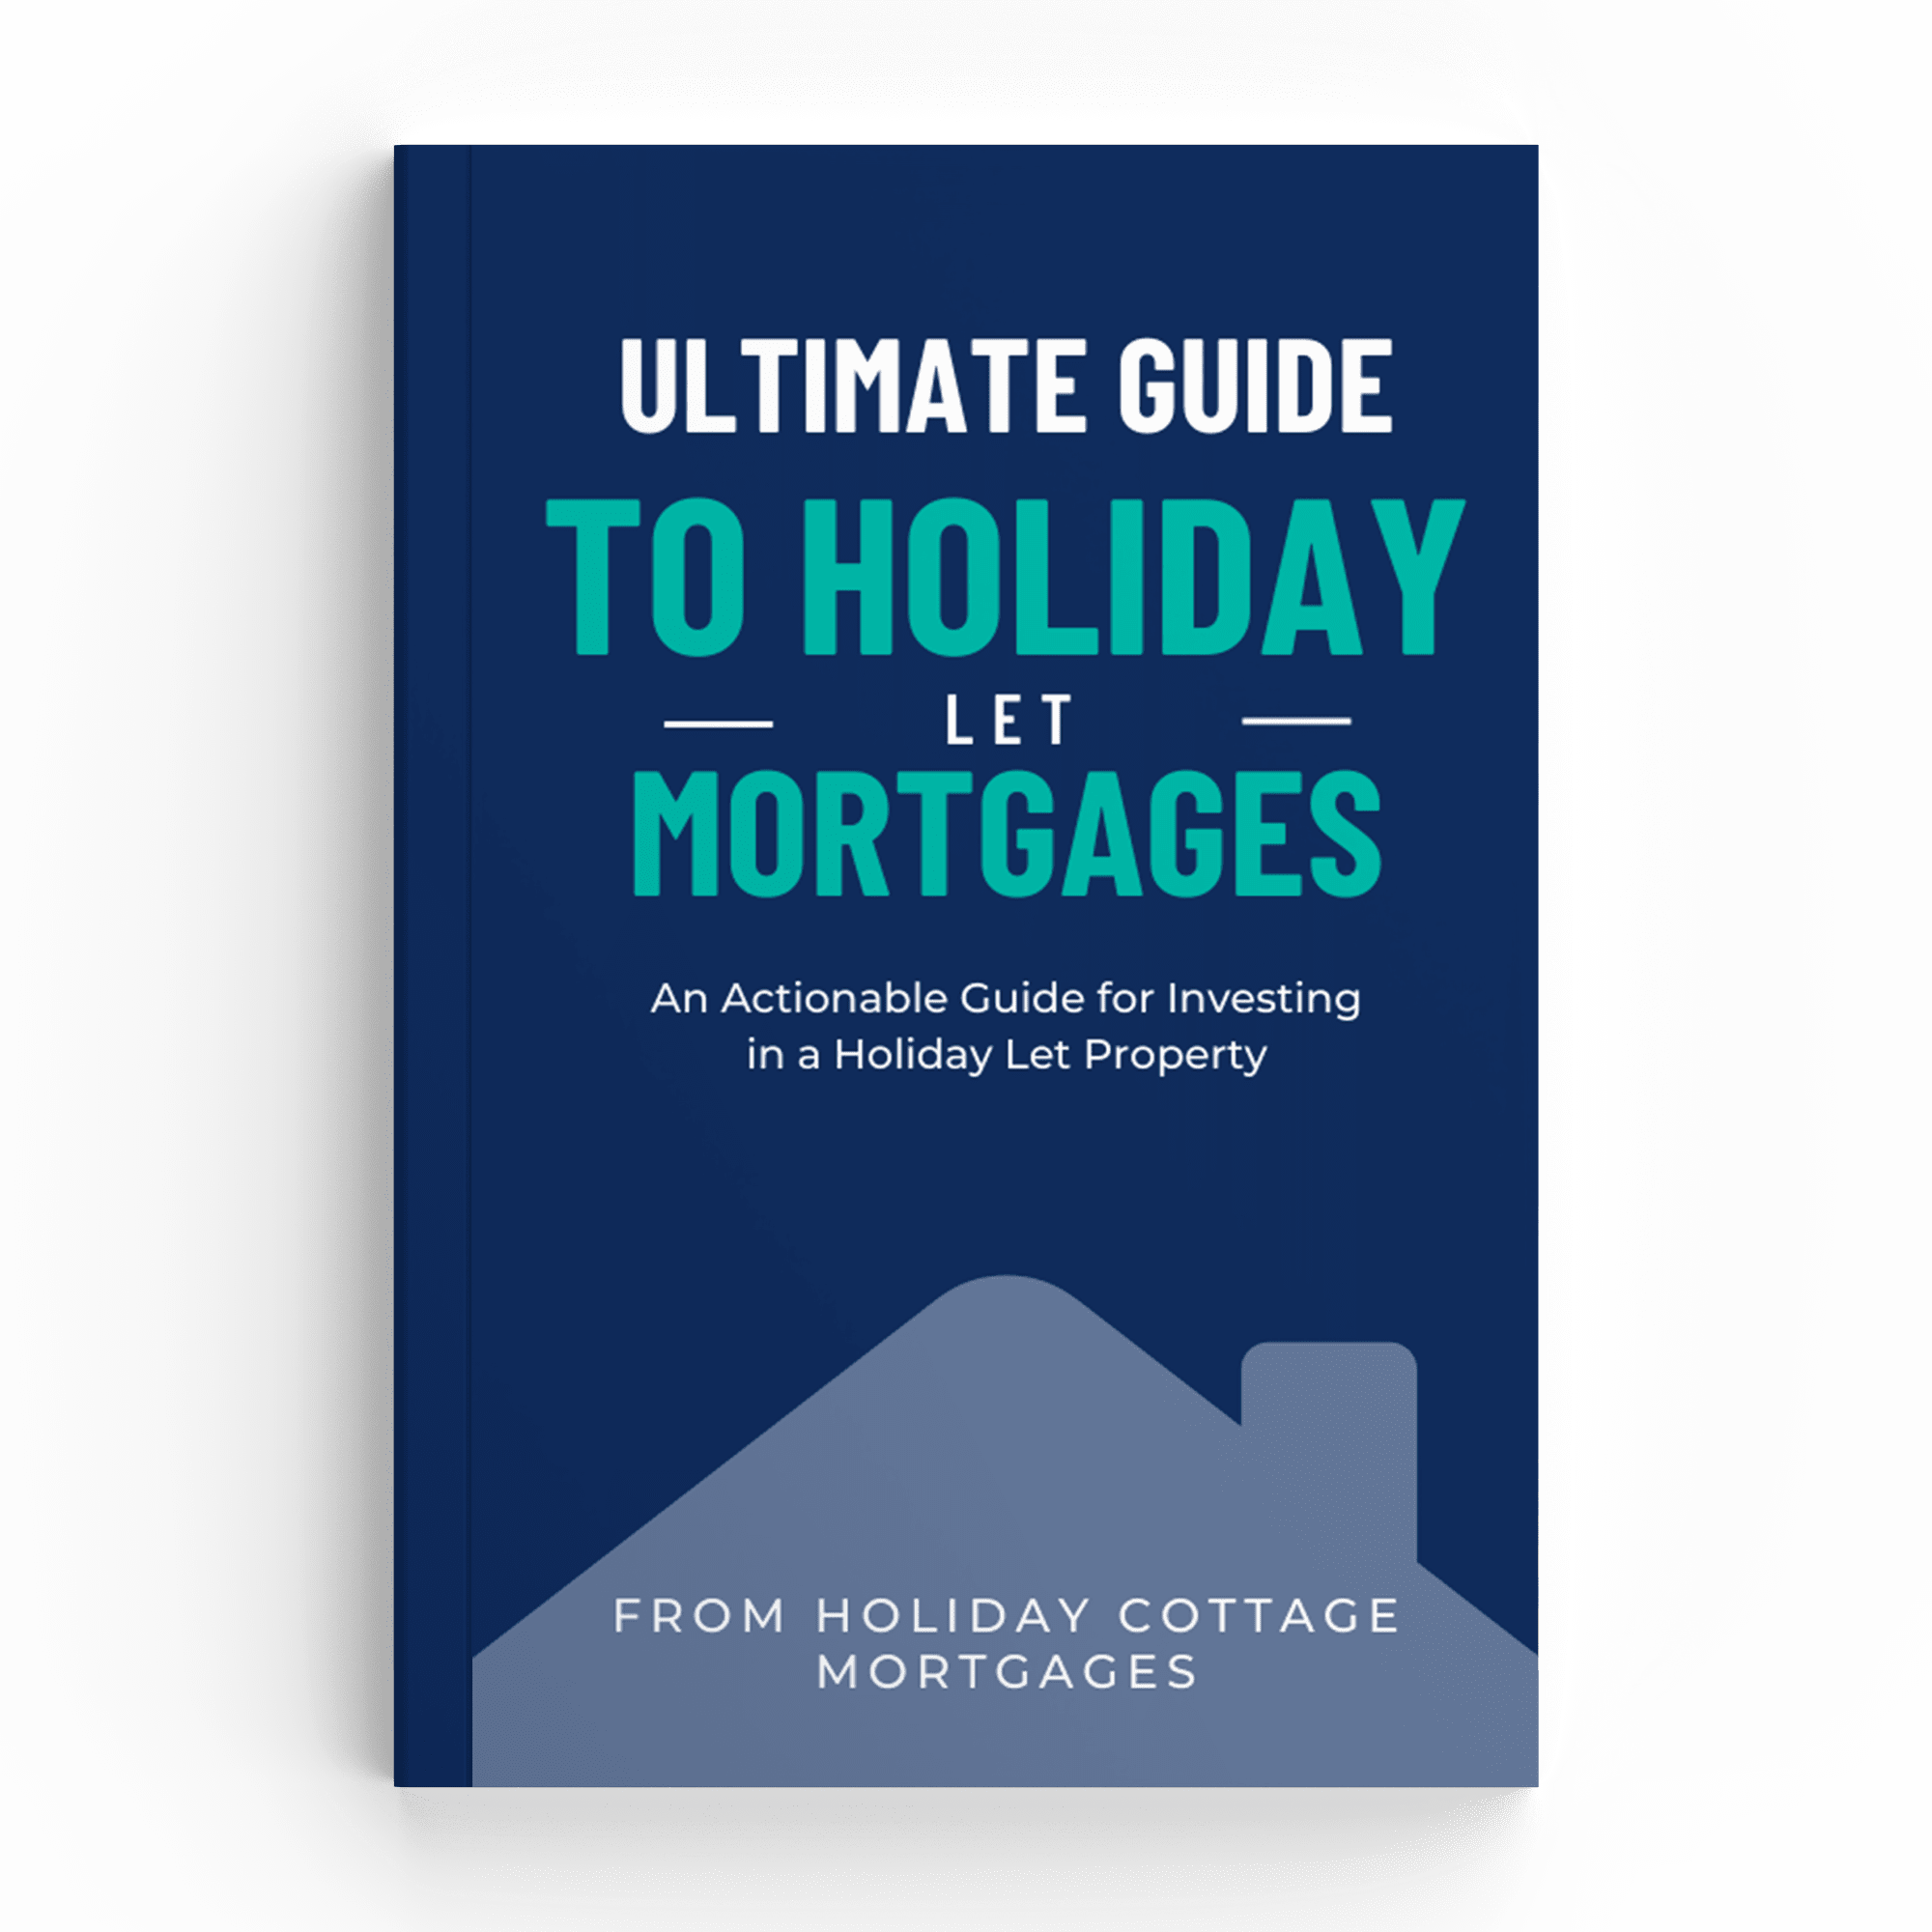 Ultimate Guide to Holiday Let Mortgages by HCM